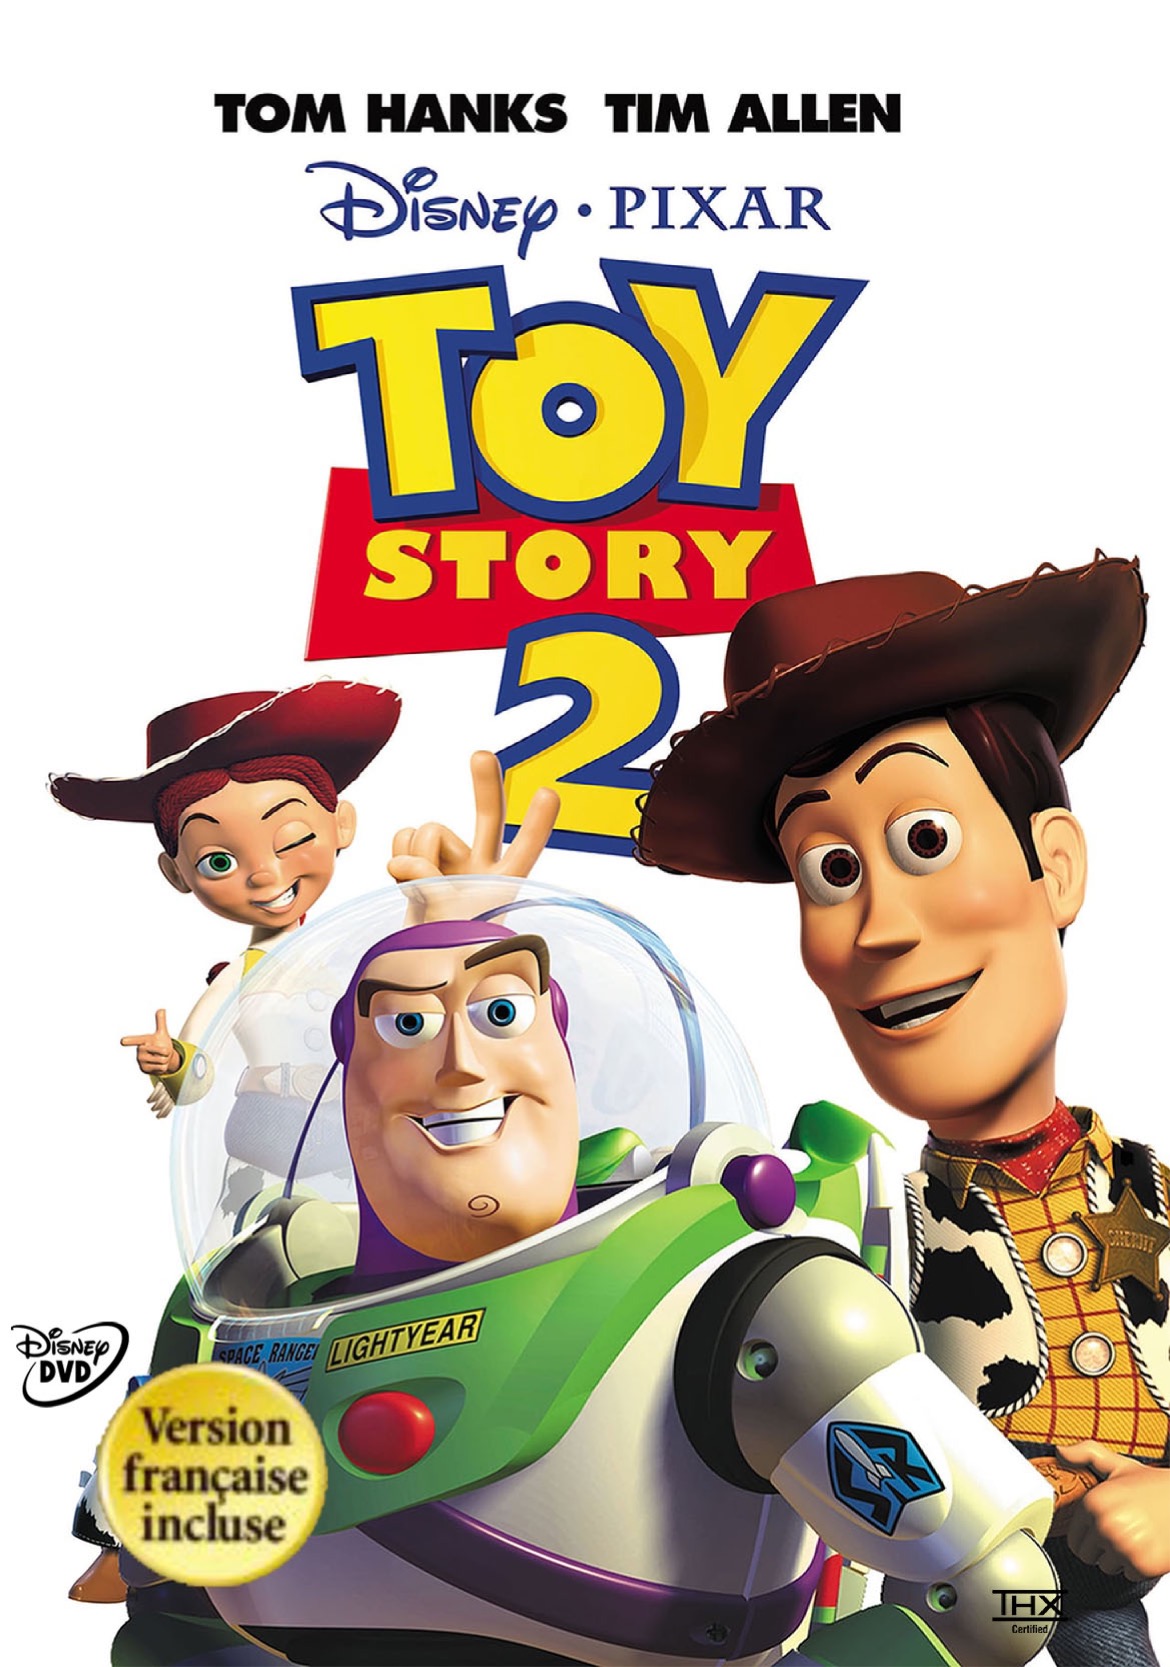 Toy Story 3 Bonnie, UK release only., Al's Toy Barn